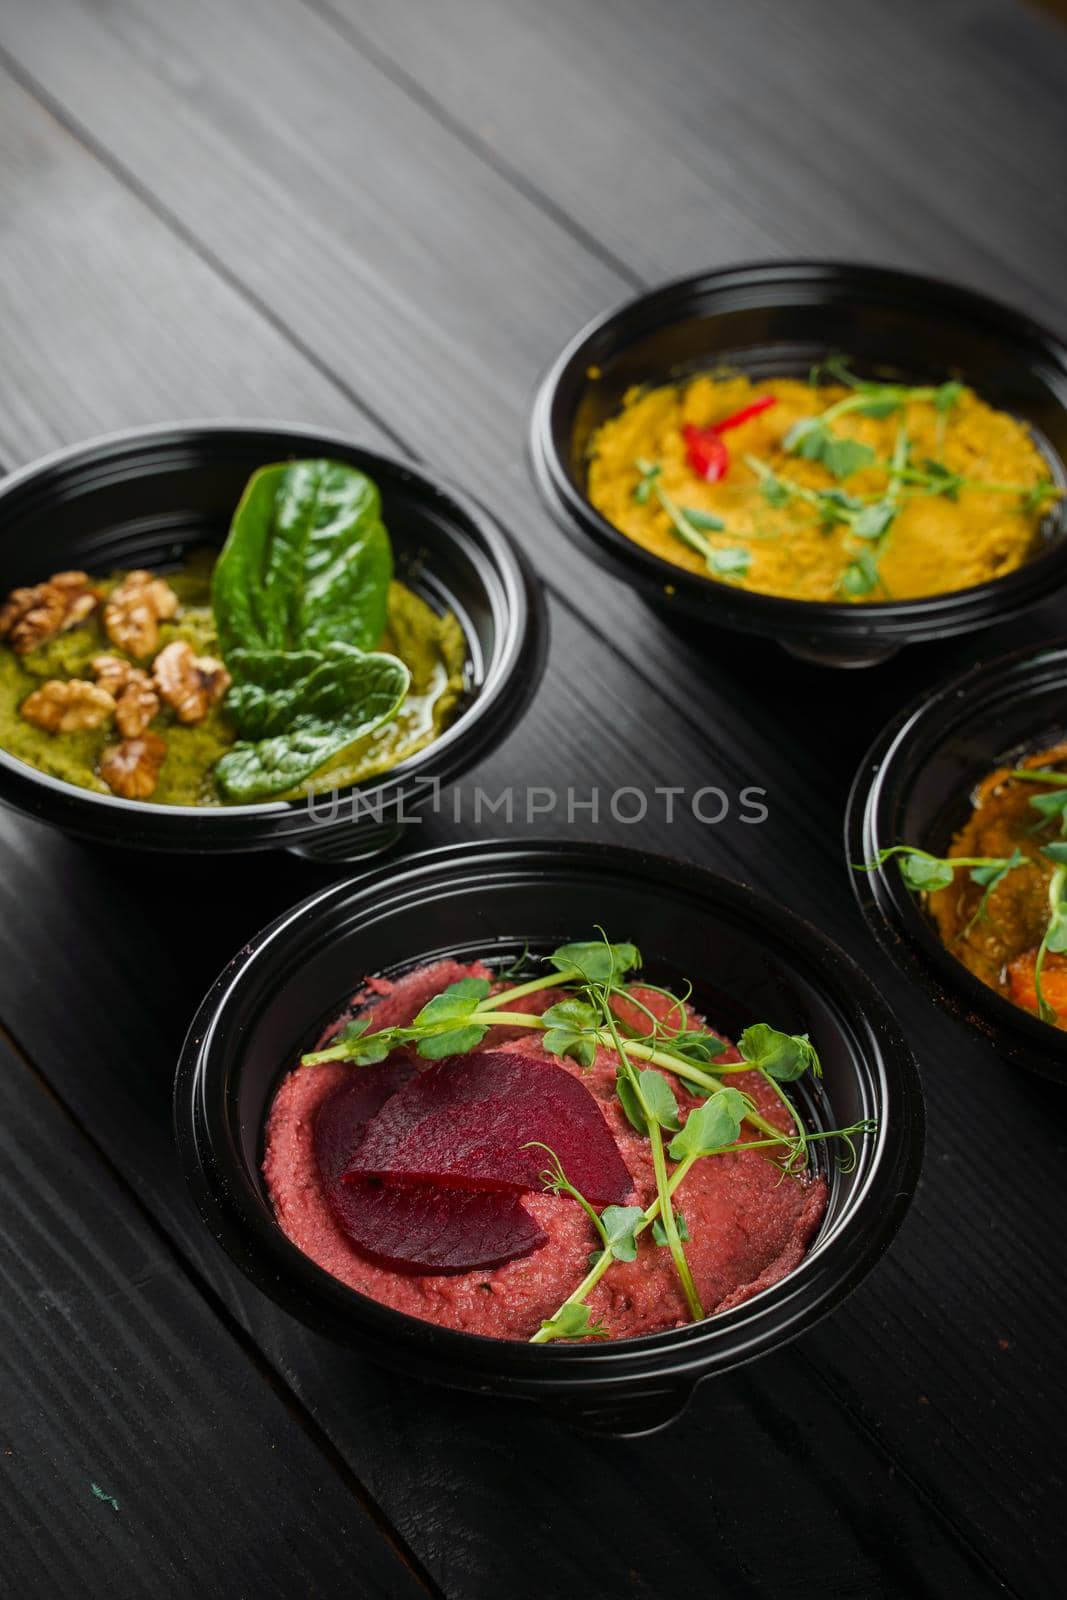 Hummus garnished peppers, chili, beet and herbs in black bowl on dark wooden table. Hummus assortment by Rabizo